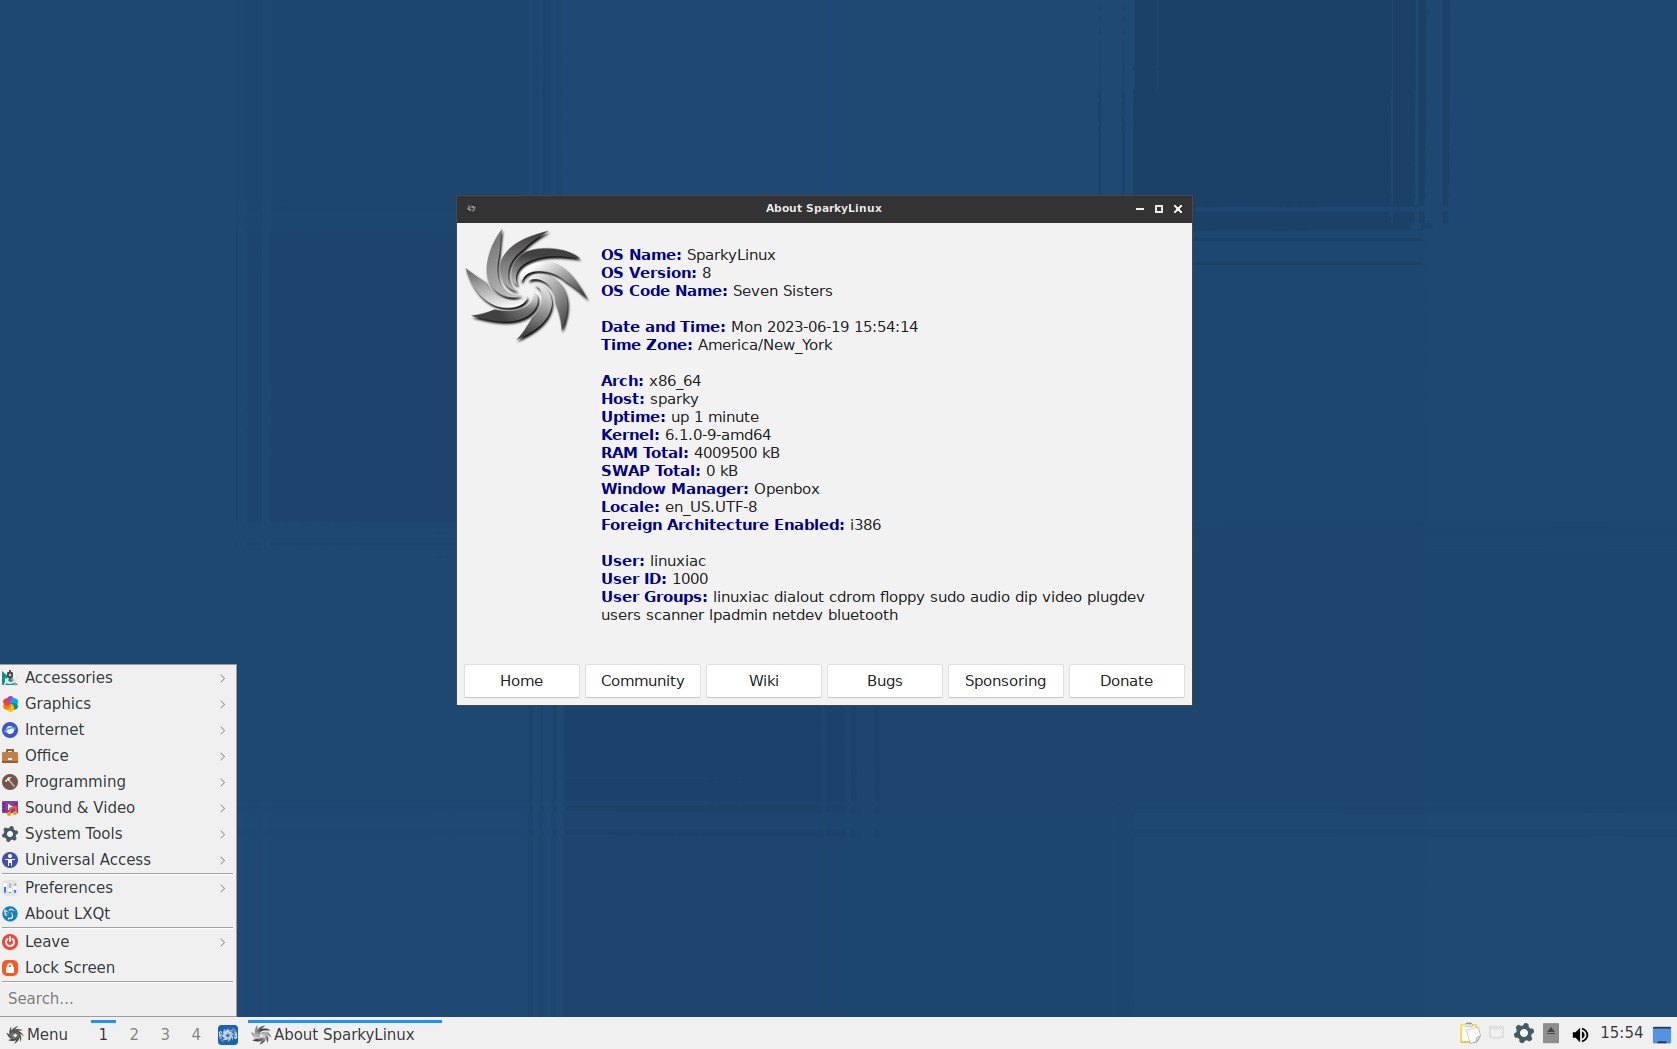 SparkyLinux 8 "The Seven Sisters"